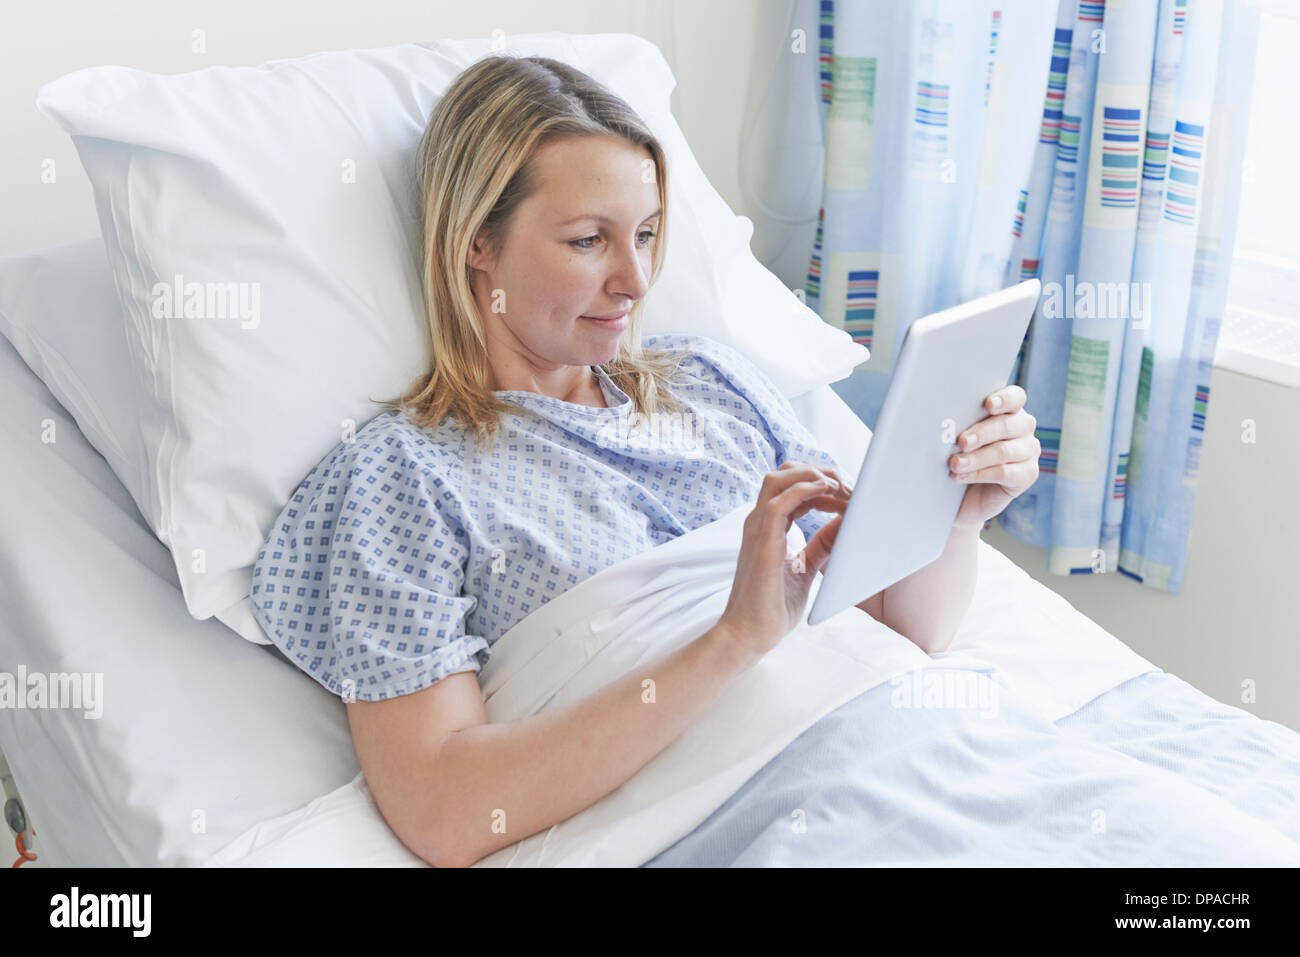 Patient lying on hospital bed using digital tablet Banque D'Images